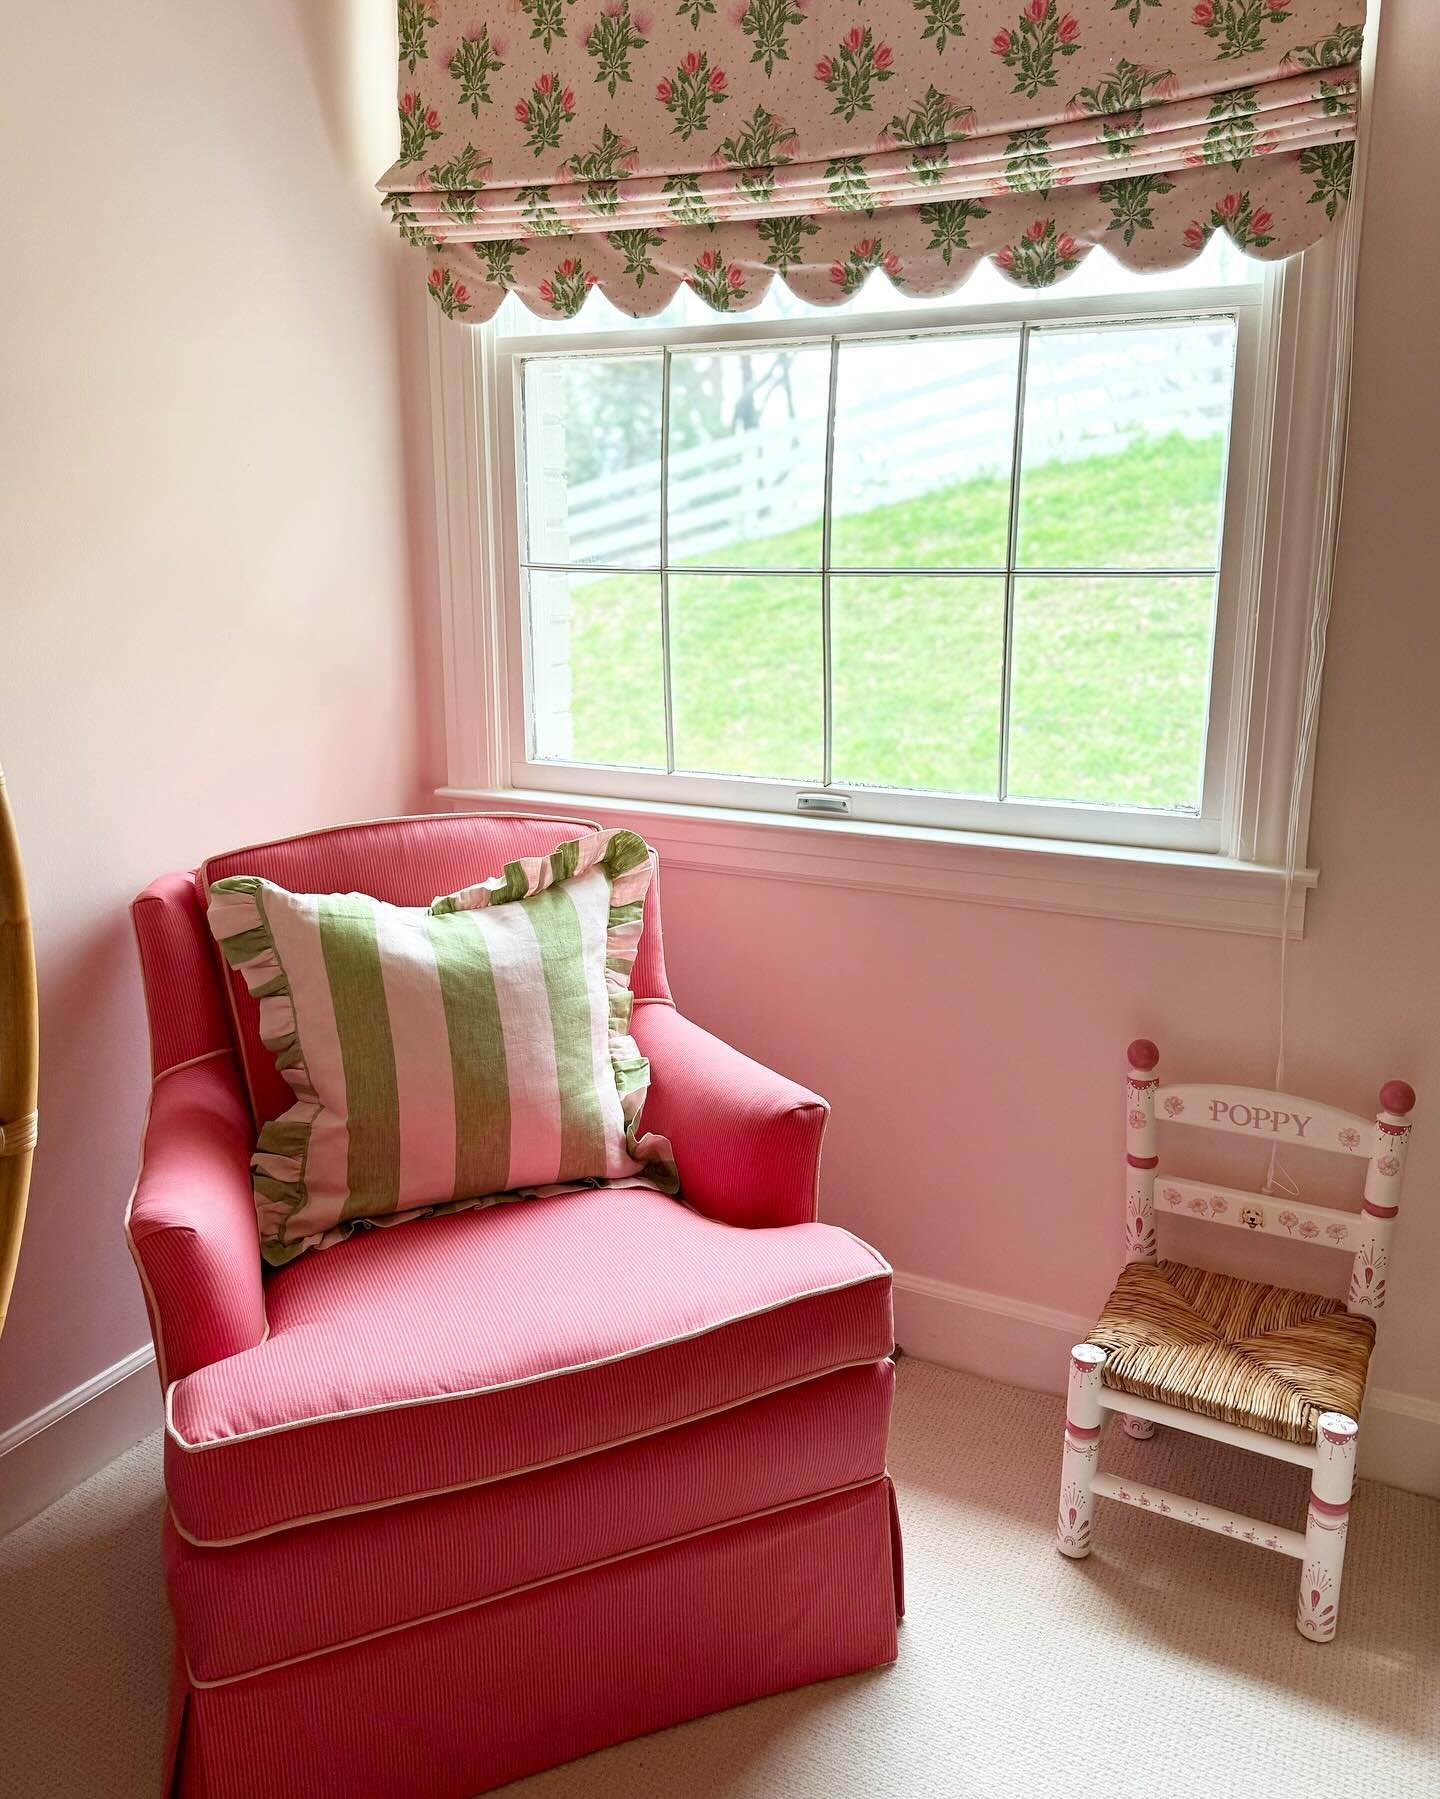 Poppy got a big girl room upgrade! 🌷 We paired this fun hot pink ticking stripe with peach contrast welt with her @luliewallace shade and the outcome is pretty darn cute. 
.
#catherinebranstetter #girlbedroom #pinkbedroom #kidsroom #kidsroominspo #p